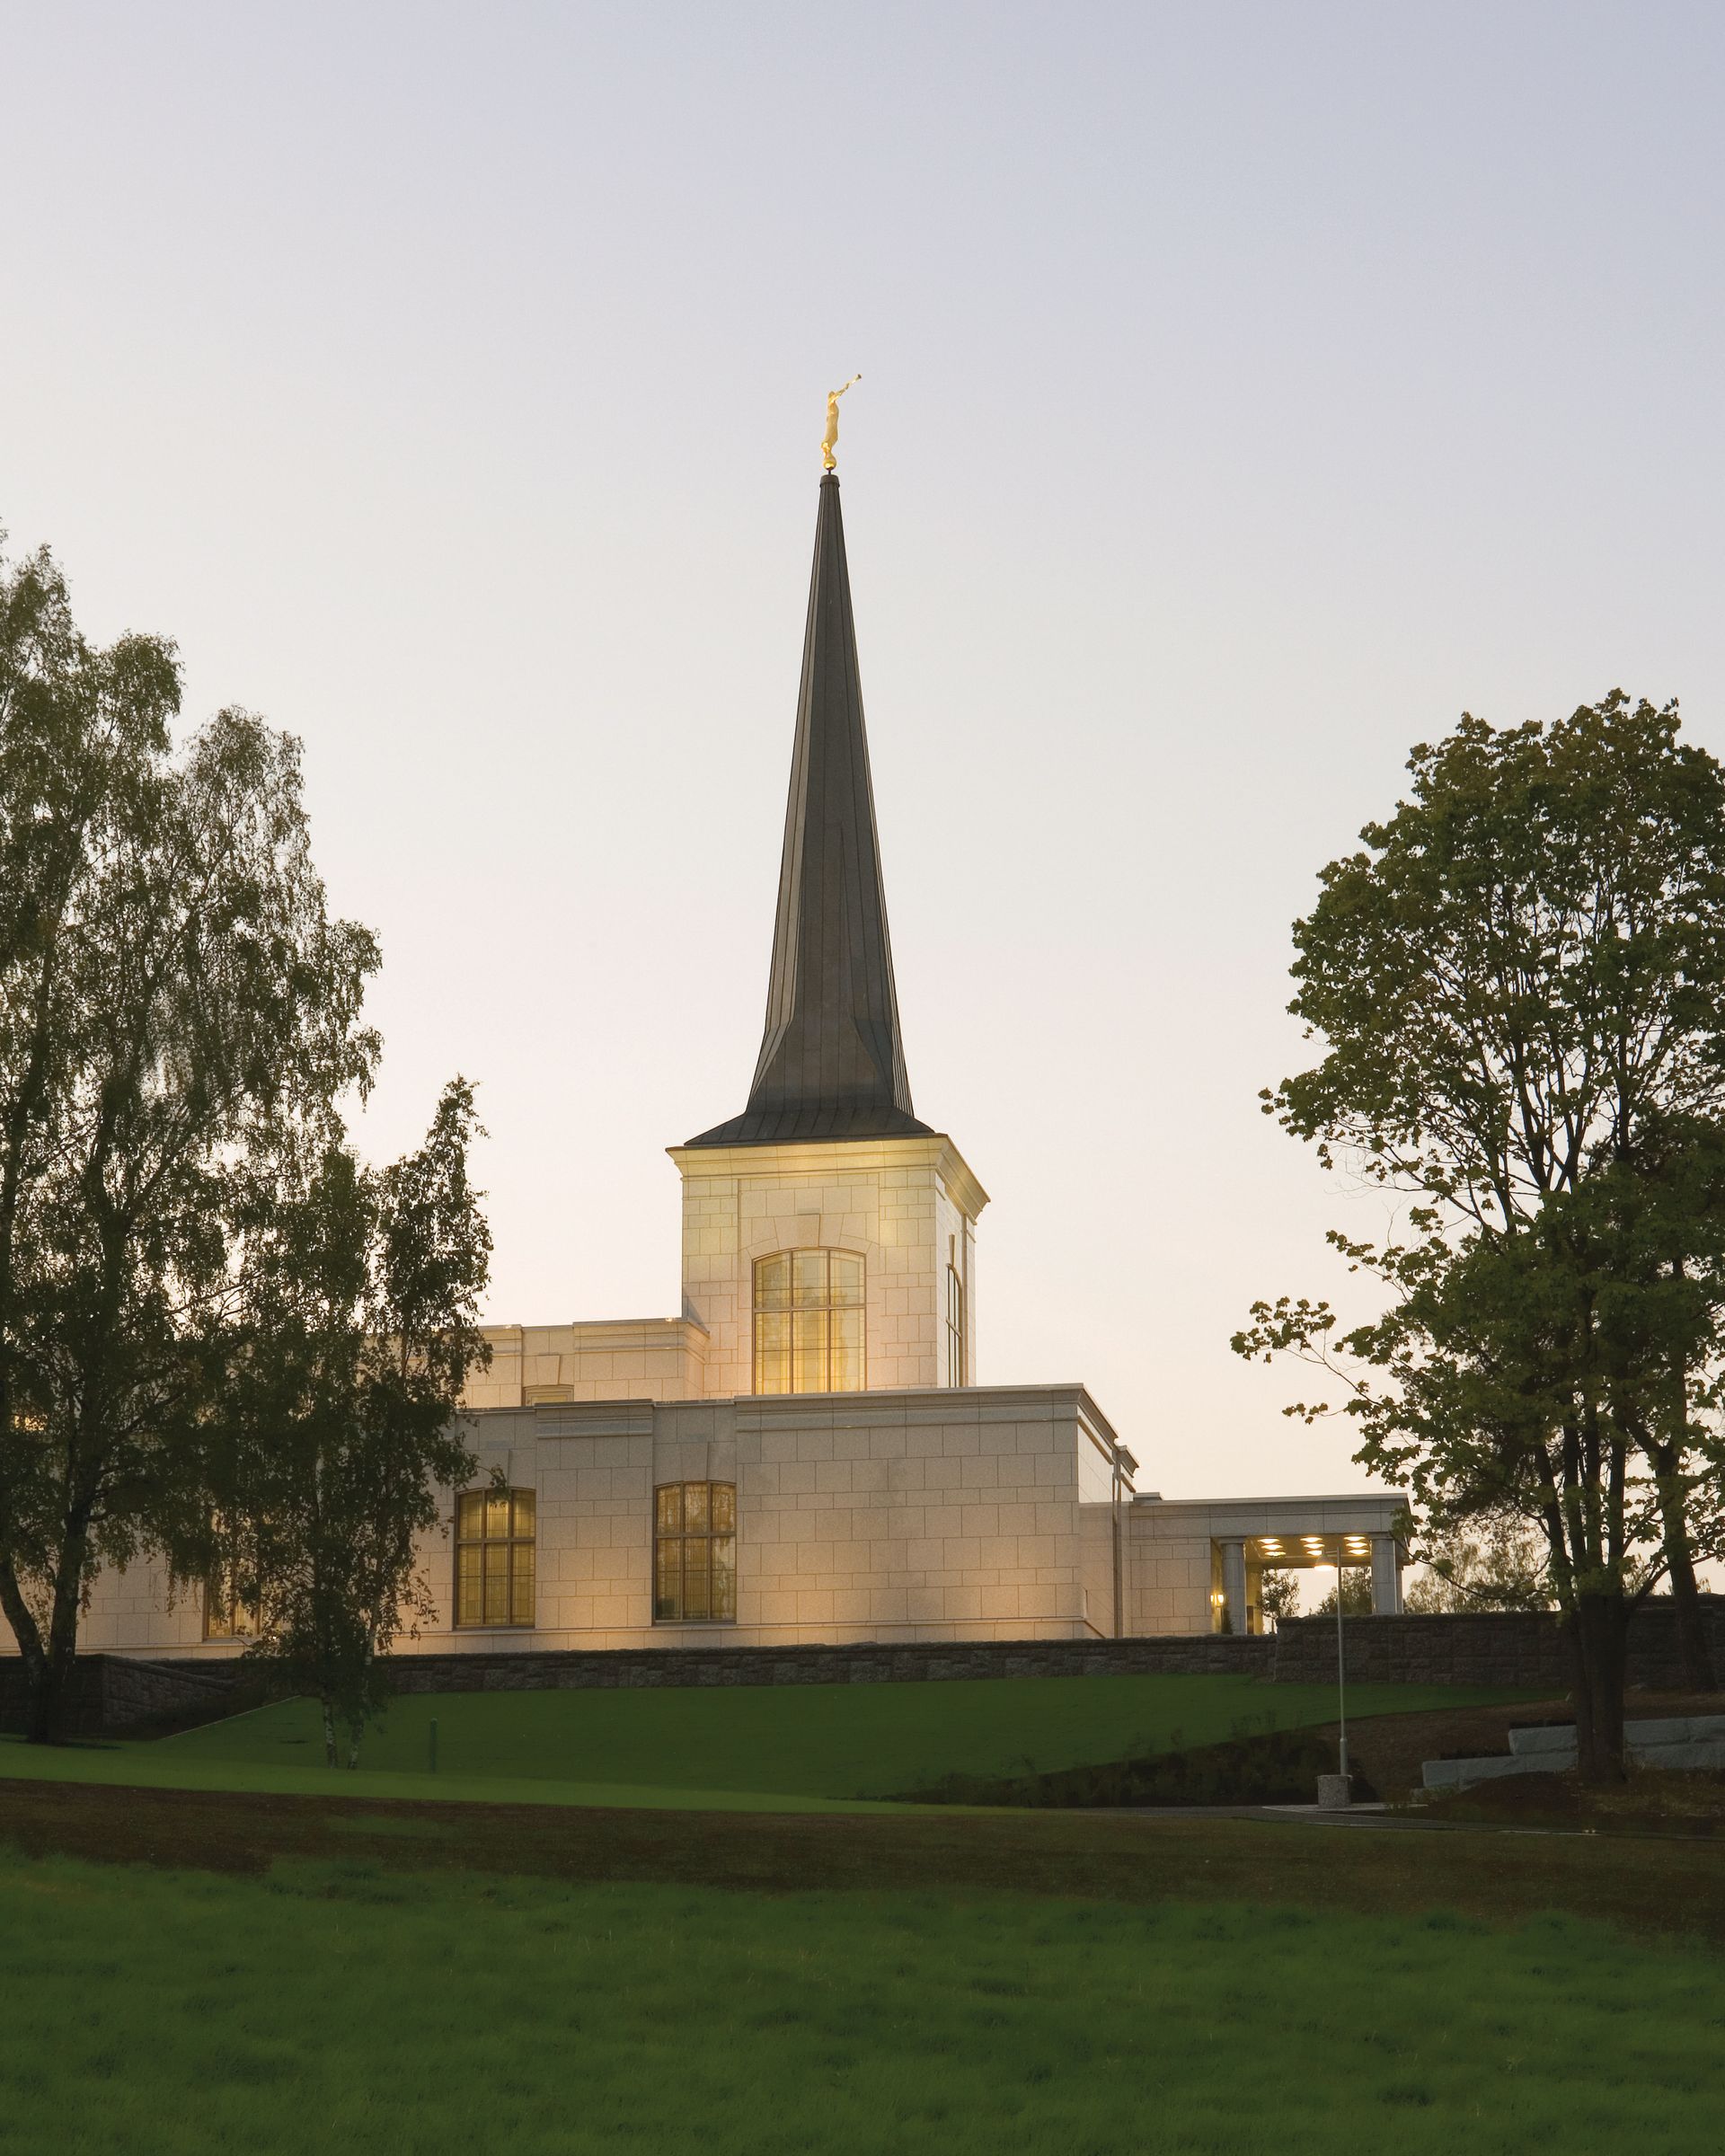 A view of the Helsinki Finland Temple from the temple grounds.